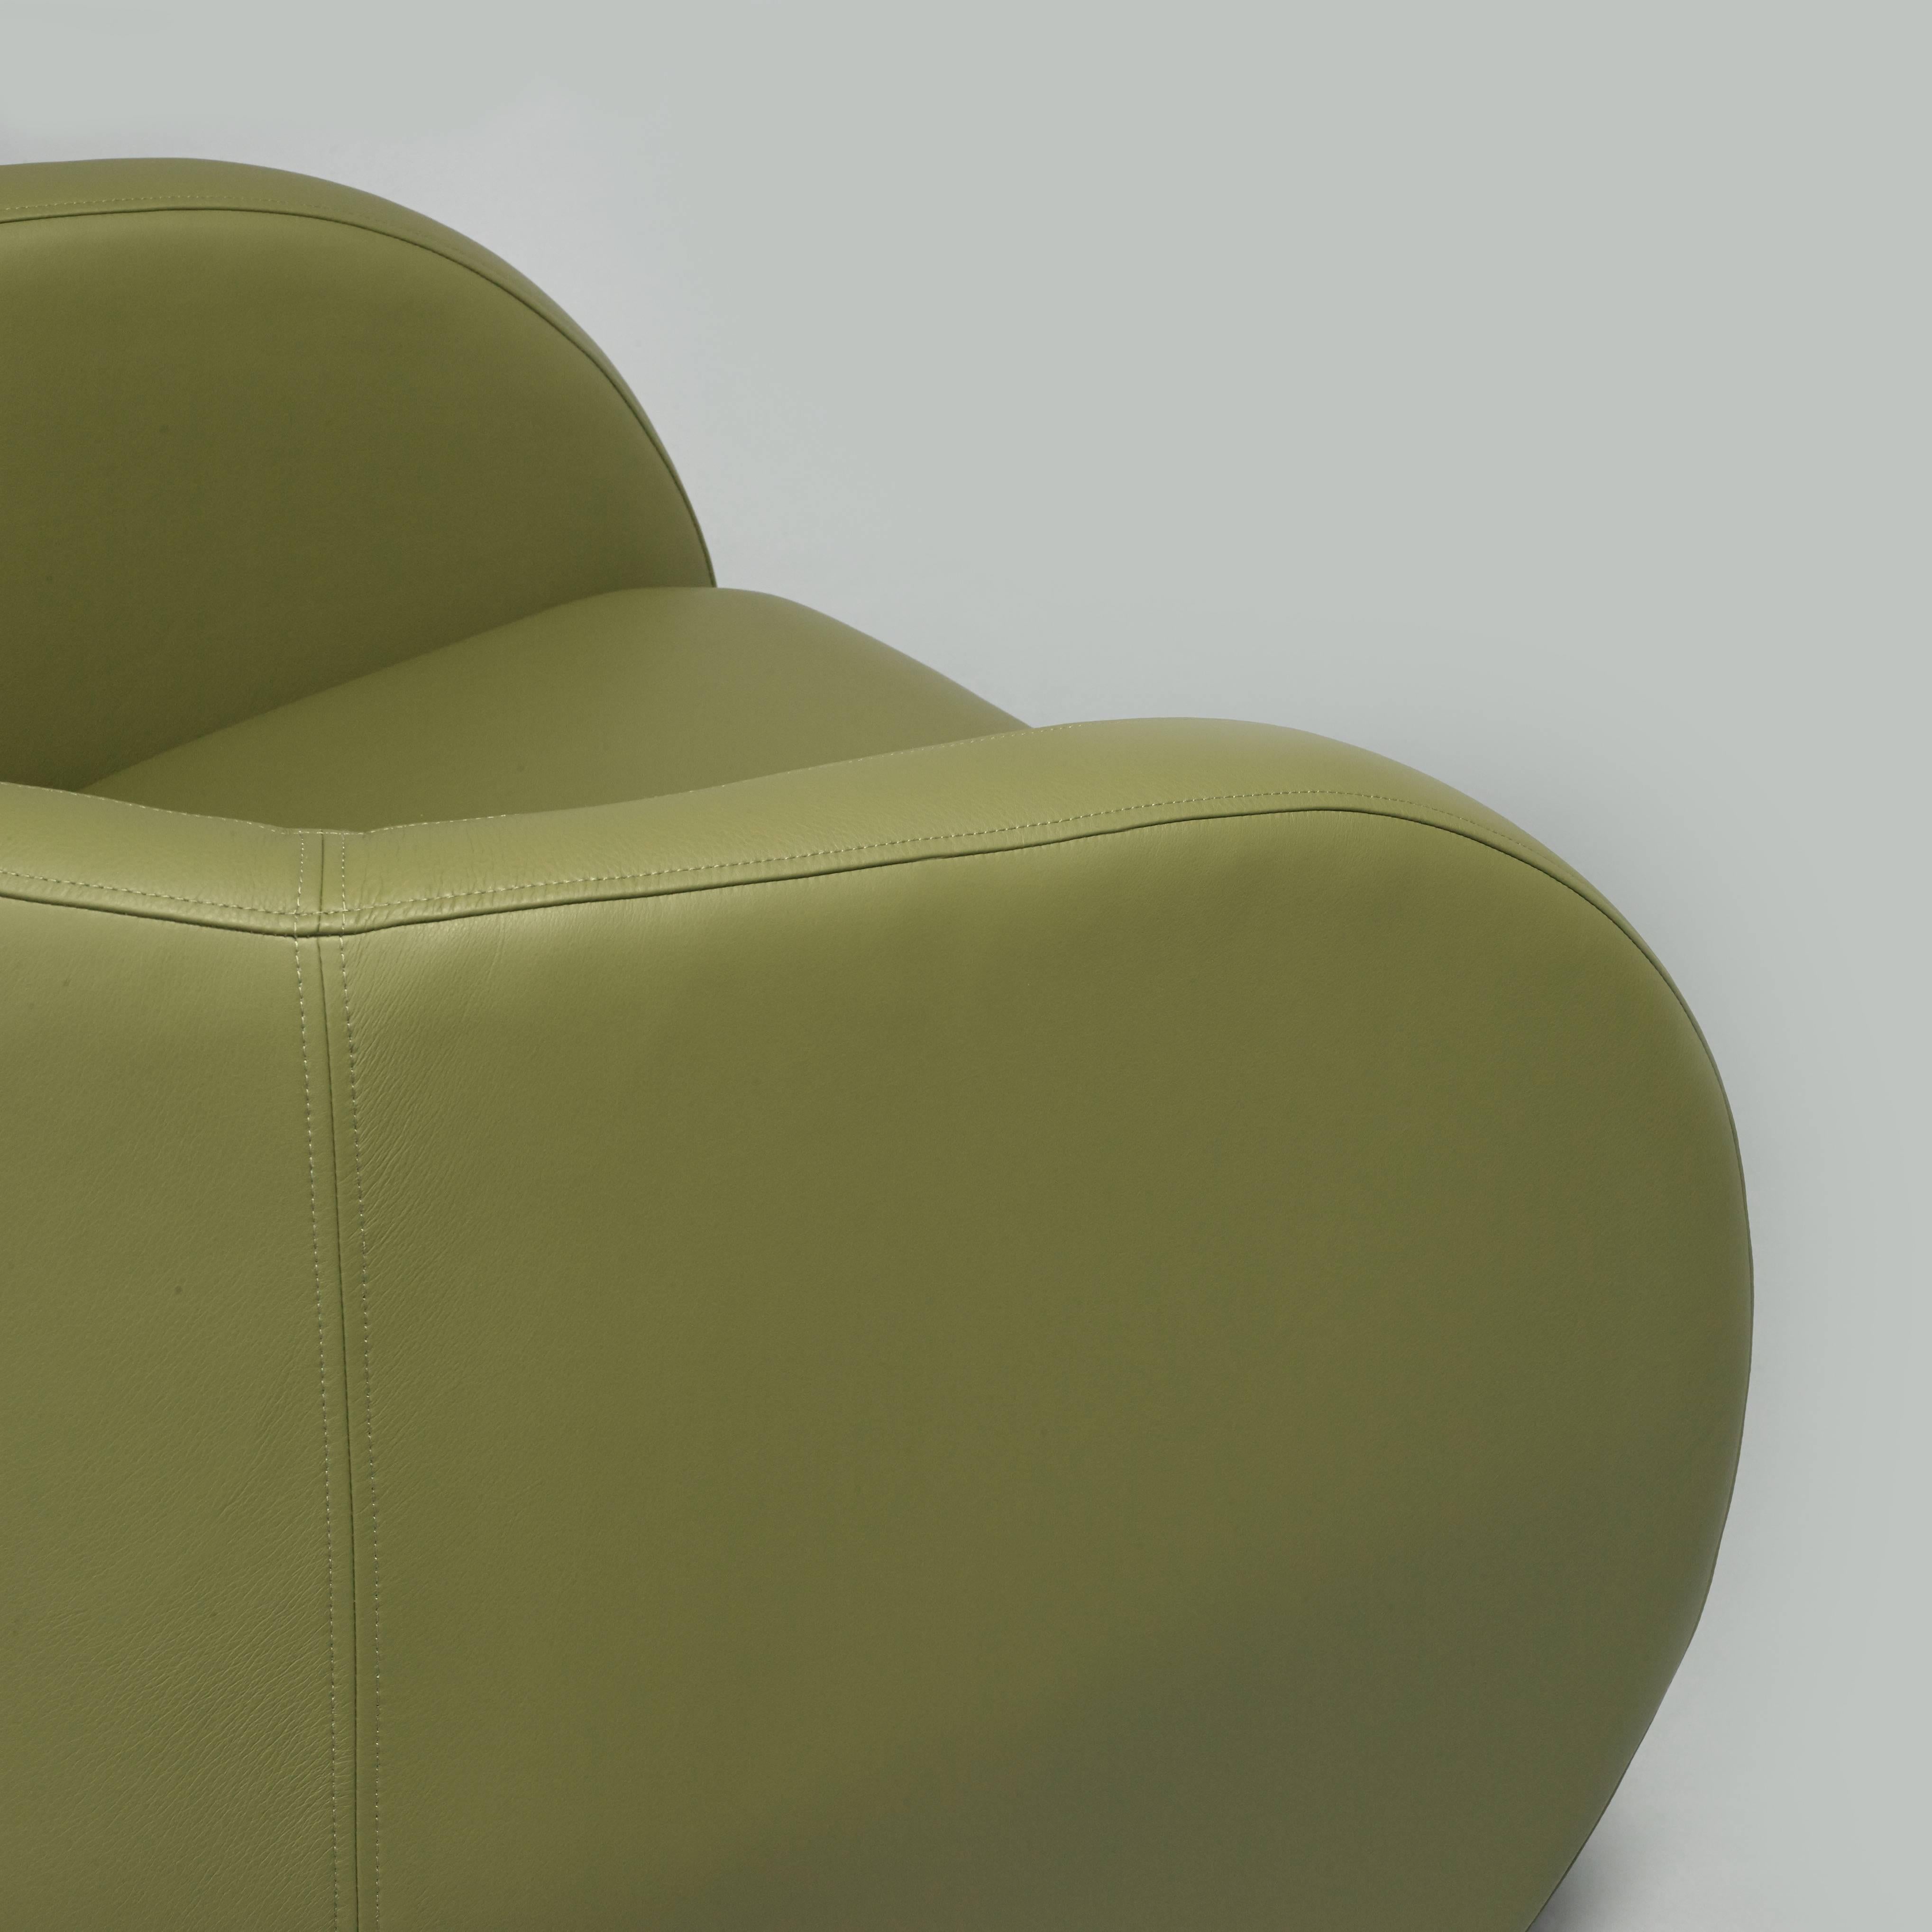 European Modern Organic Olive Leather Armchair In Excellent Condition For Sale In Sydney, NSW